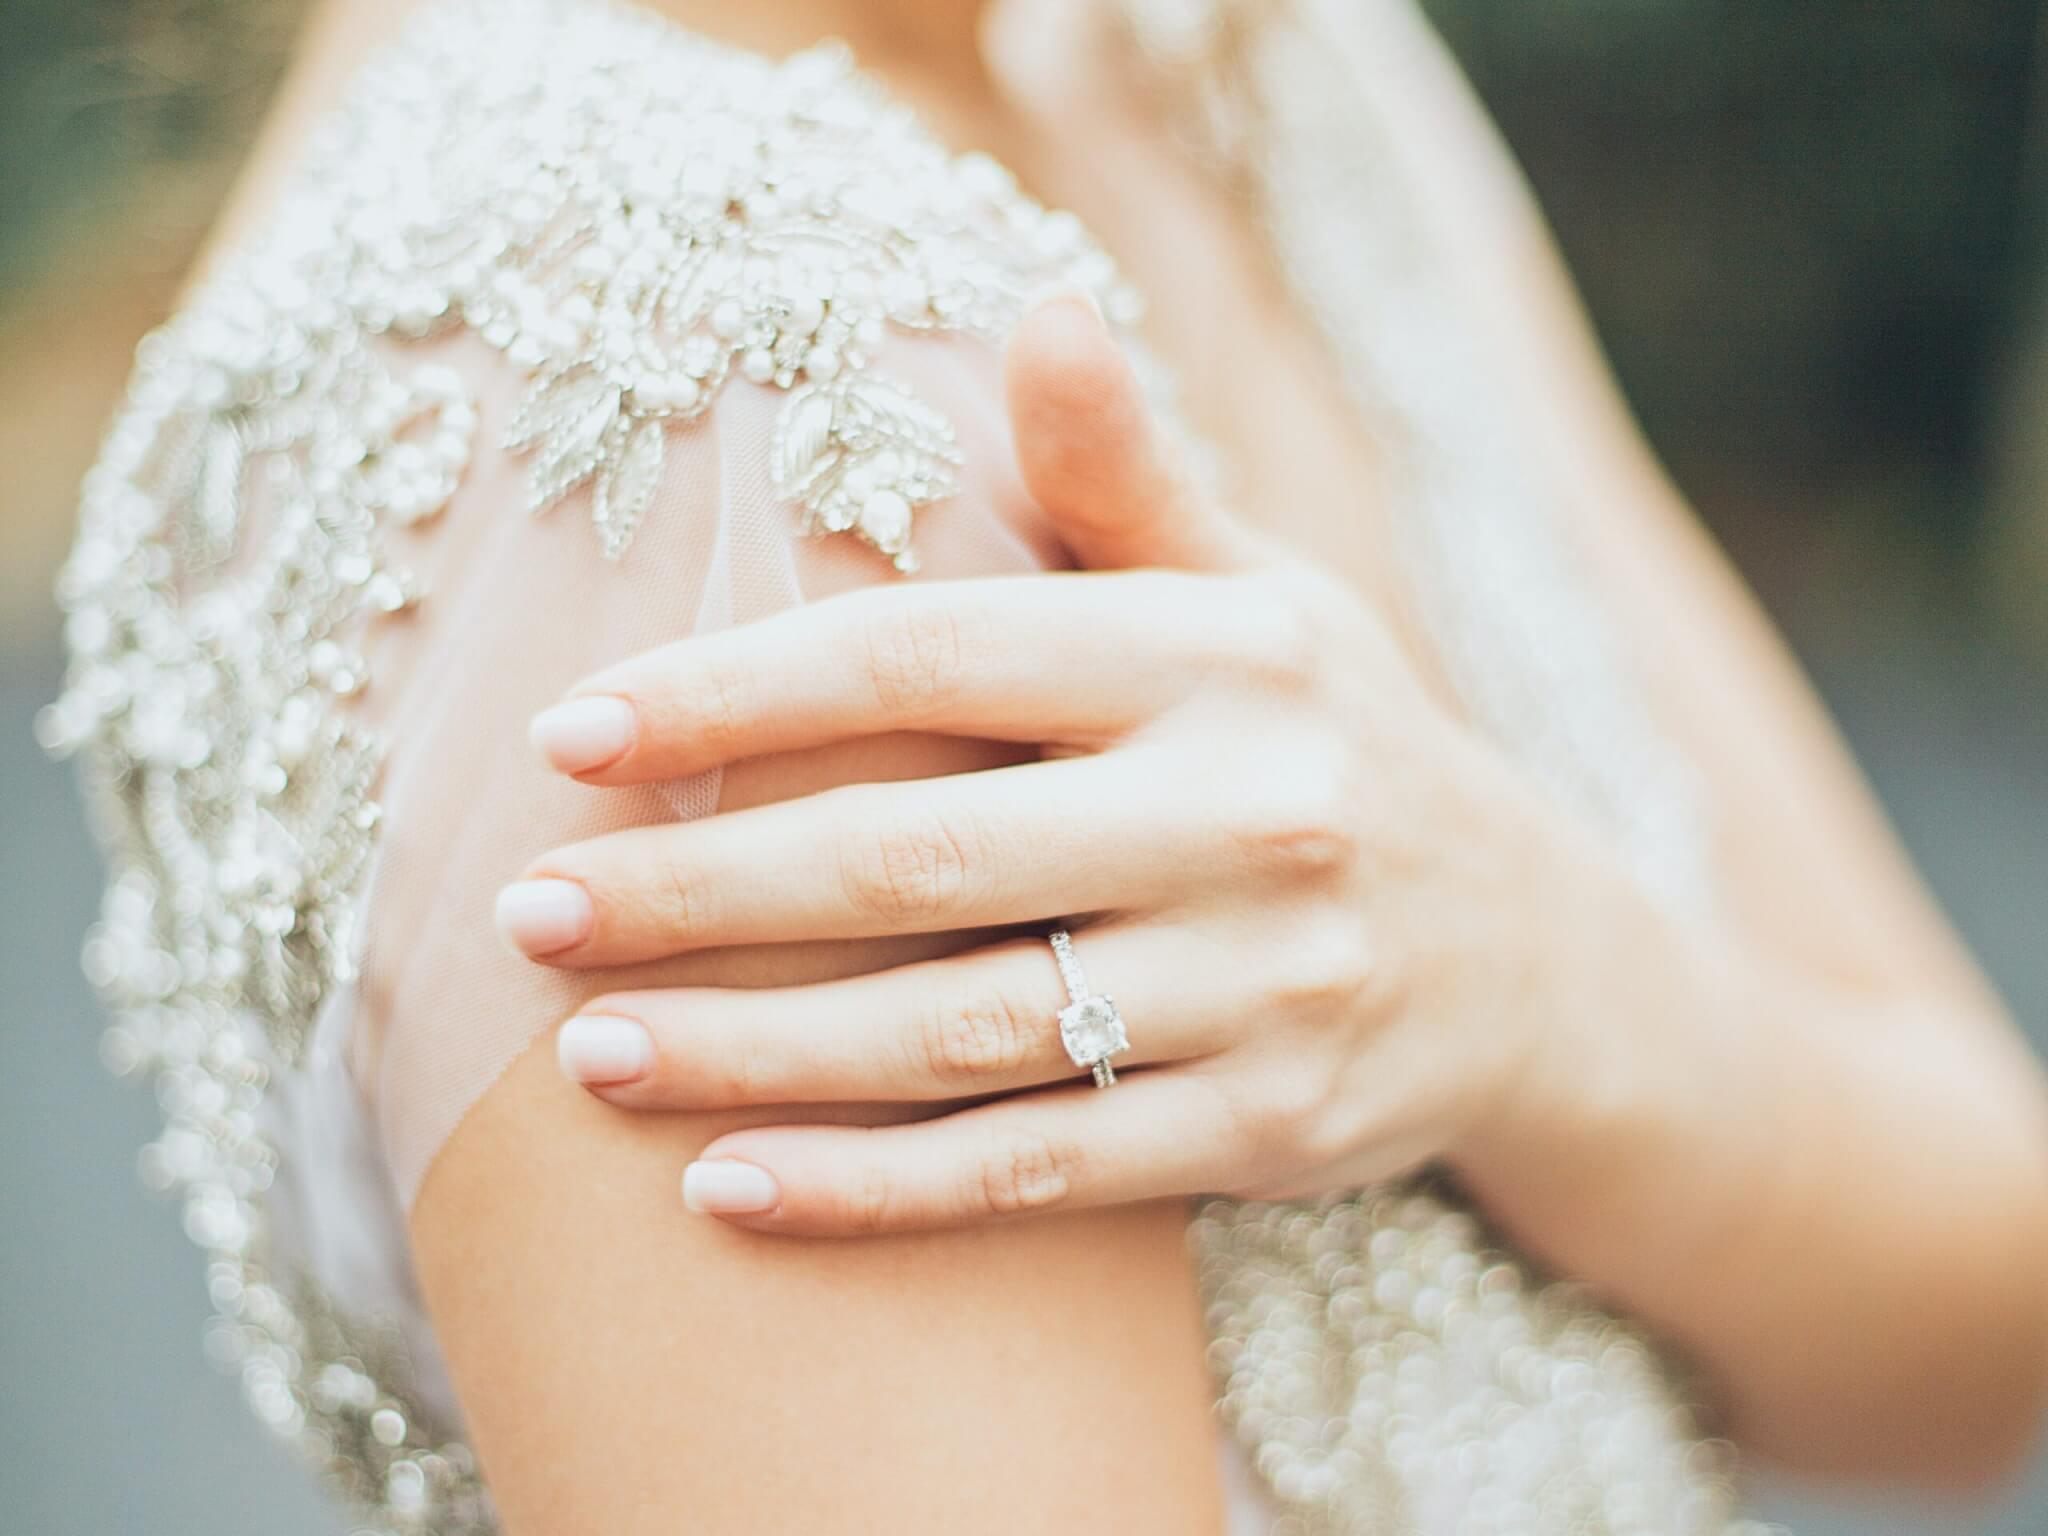 Bride on wedding day with engagement ring pictured. 

West Virginia Weddings